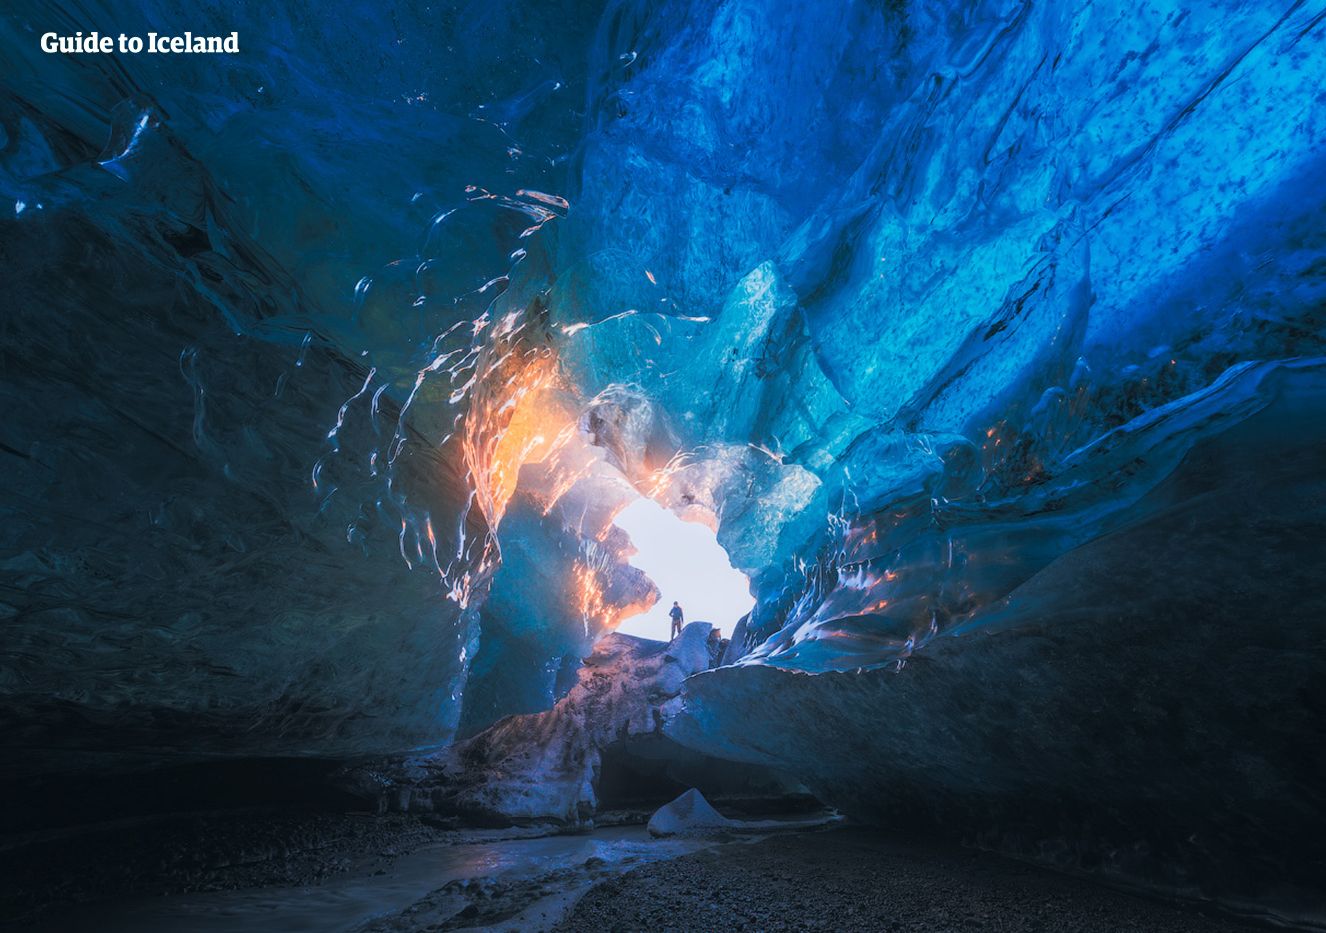 Under Vatnajökull glacier, there is a network of ice caves that fortunate visitors to Iceland in winter will have the opportunity to explore.